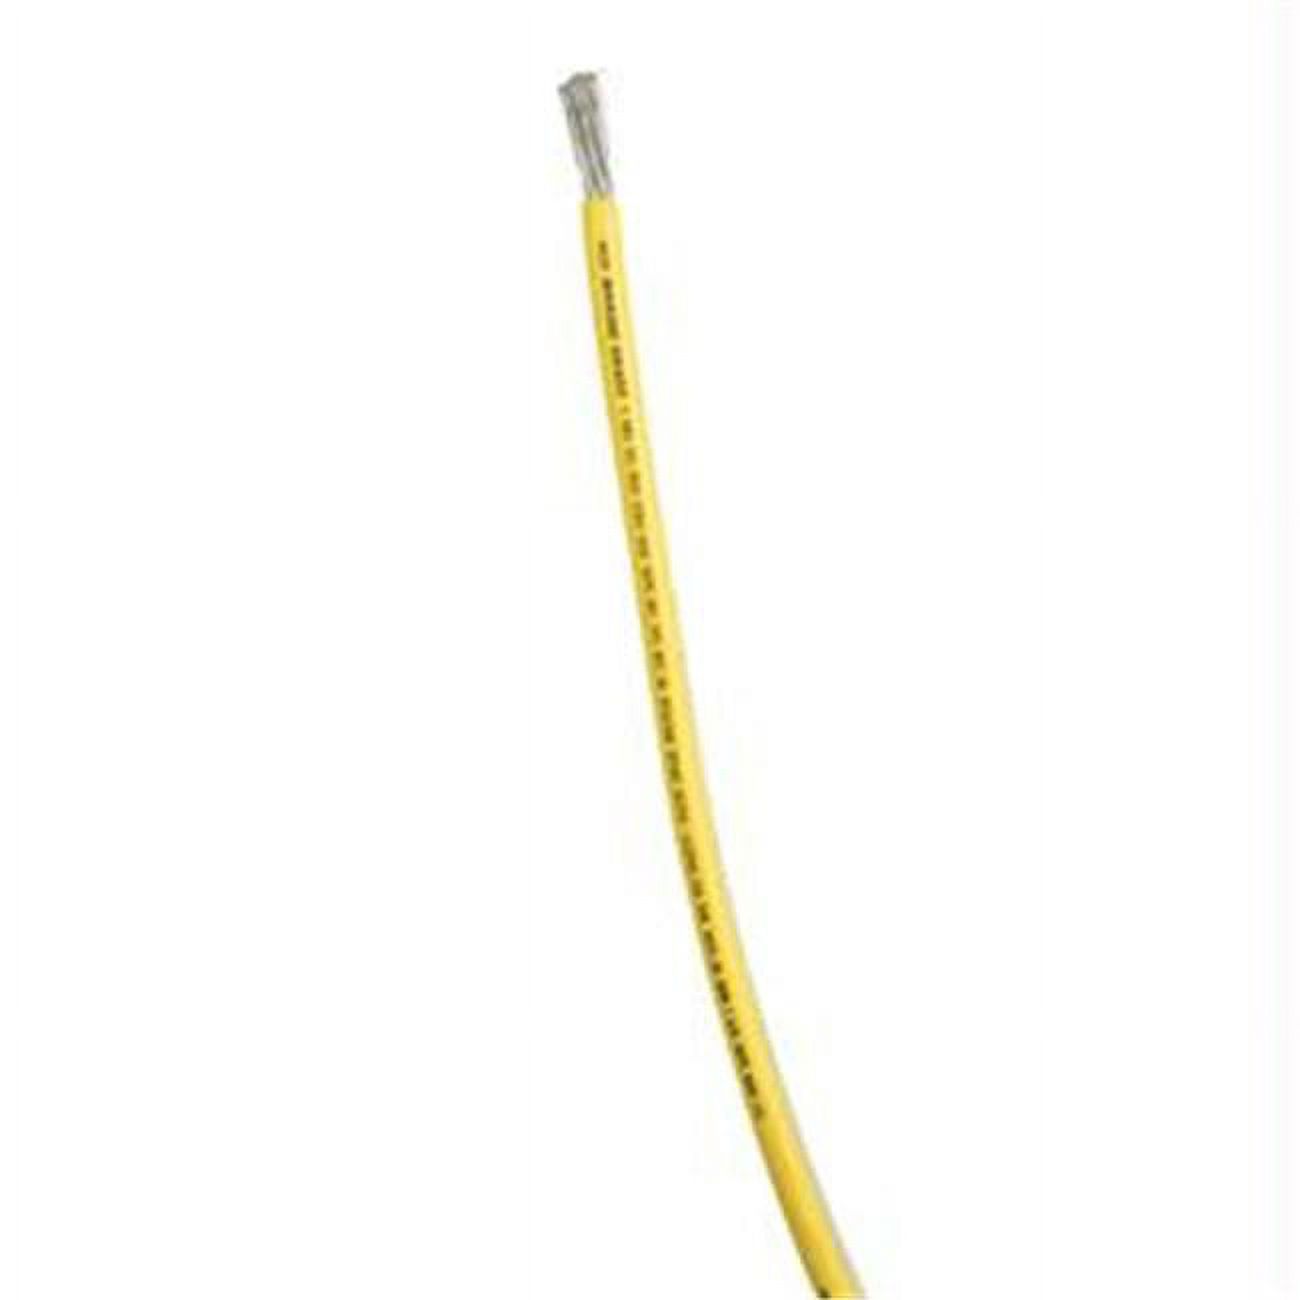 Ancor 103010 Power Products Tinned Copper Wire, 16 AWG (1mm2), Yellow, 100 ft. - image 1 of 6